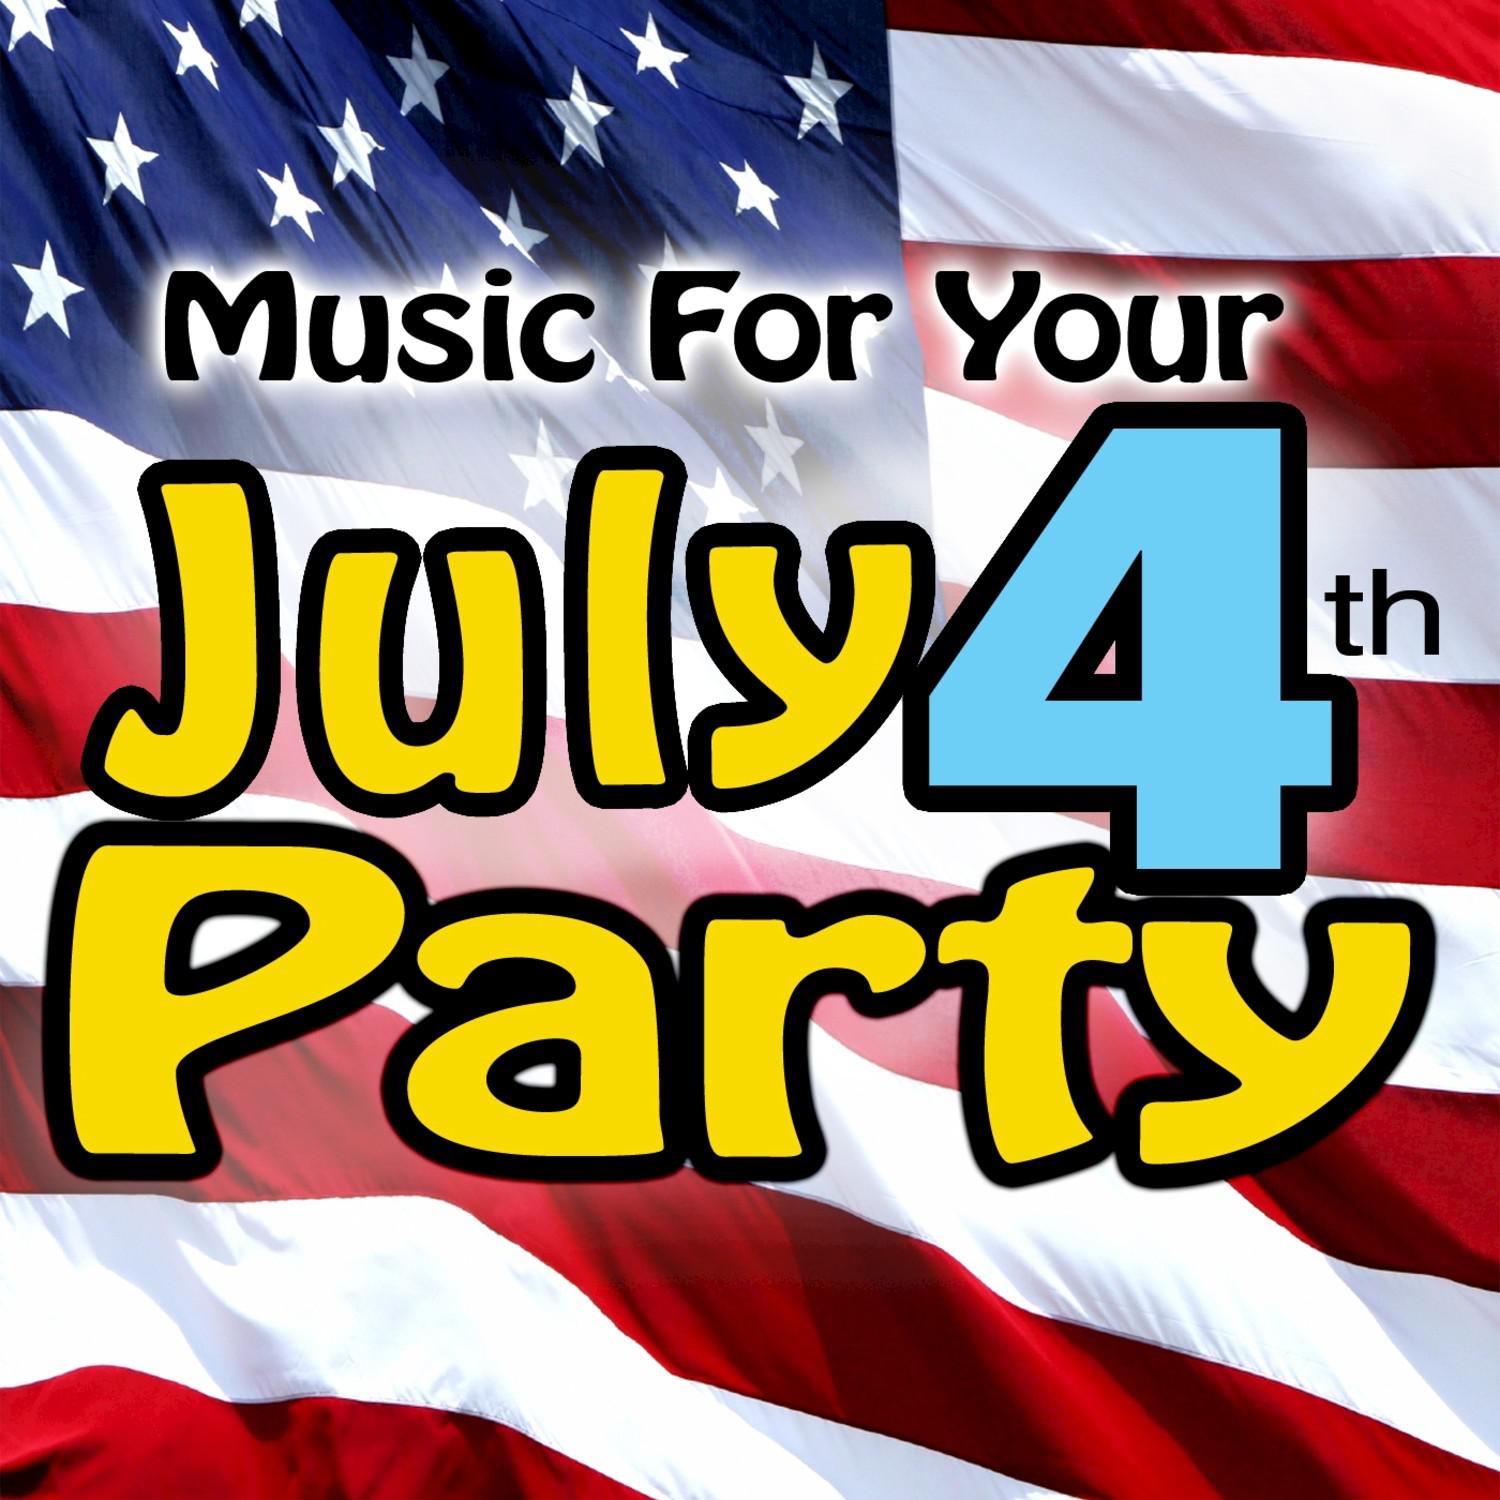 Music For Your July 4th Party